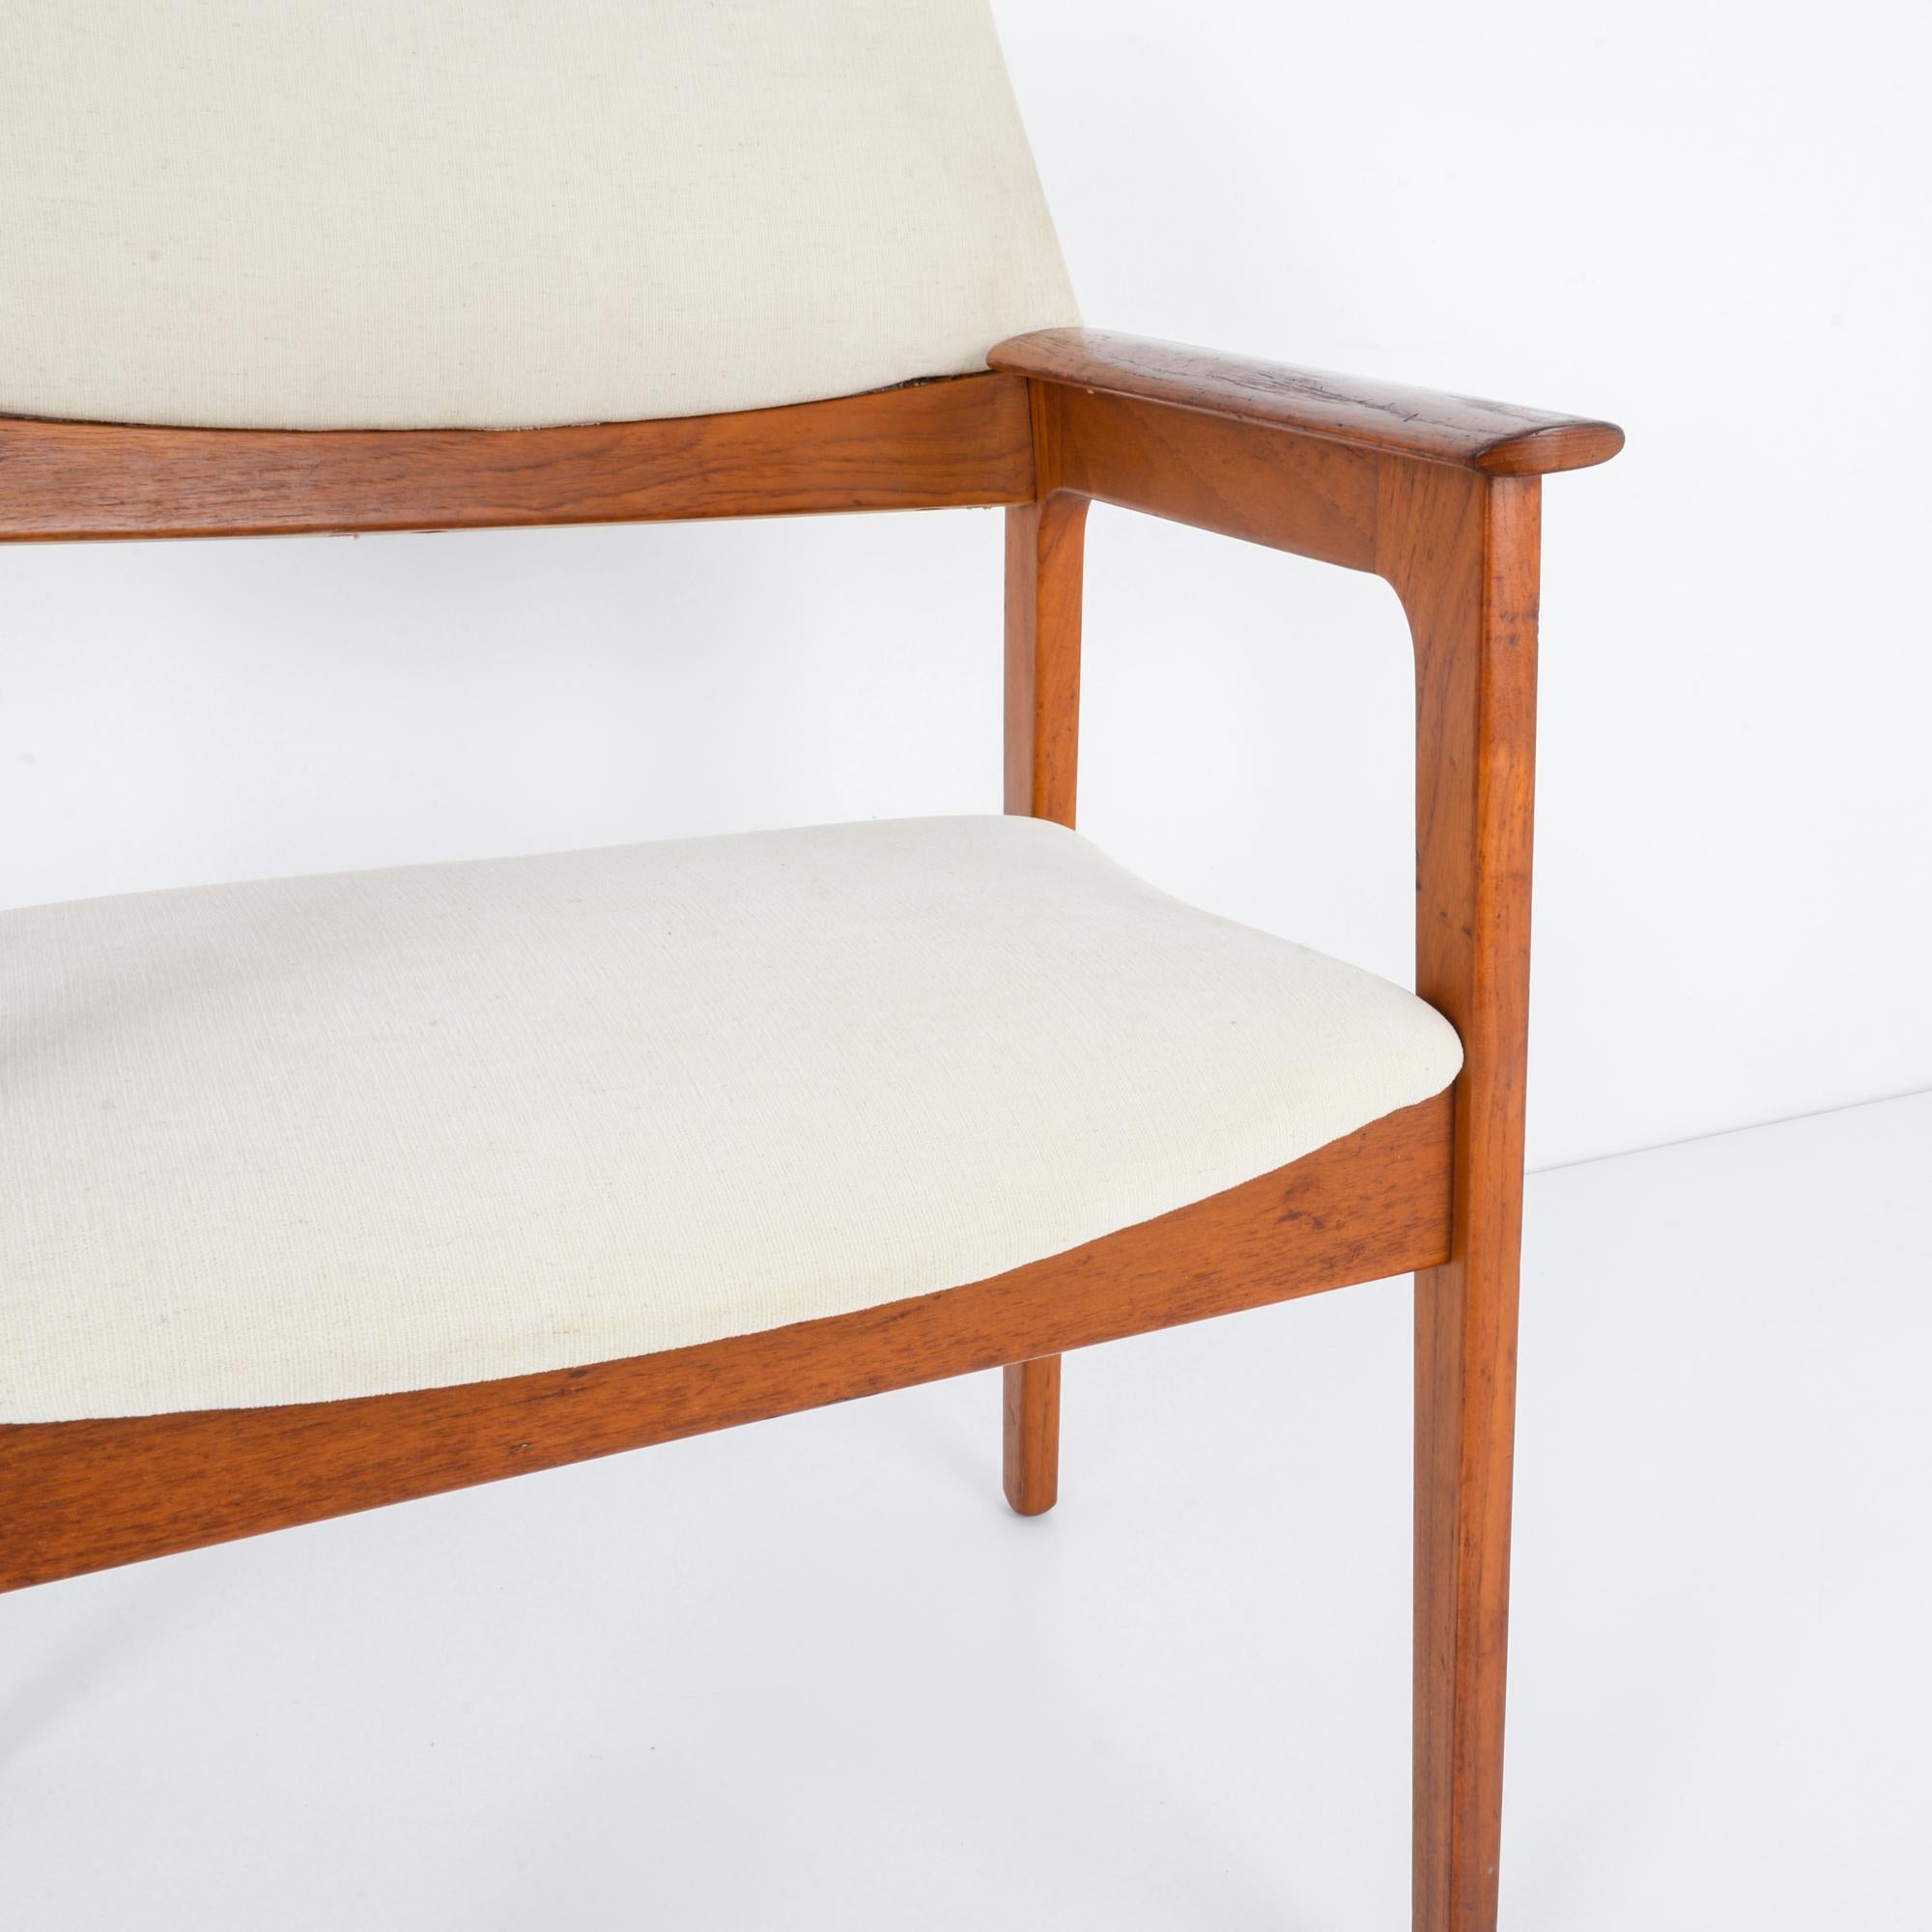 1960s Danish Wooden Armchair with Upholstered Seat and Back For Sale 2